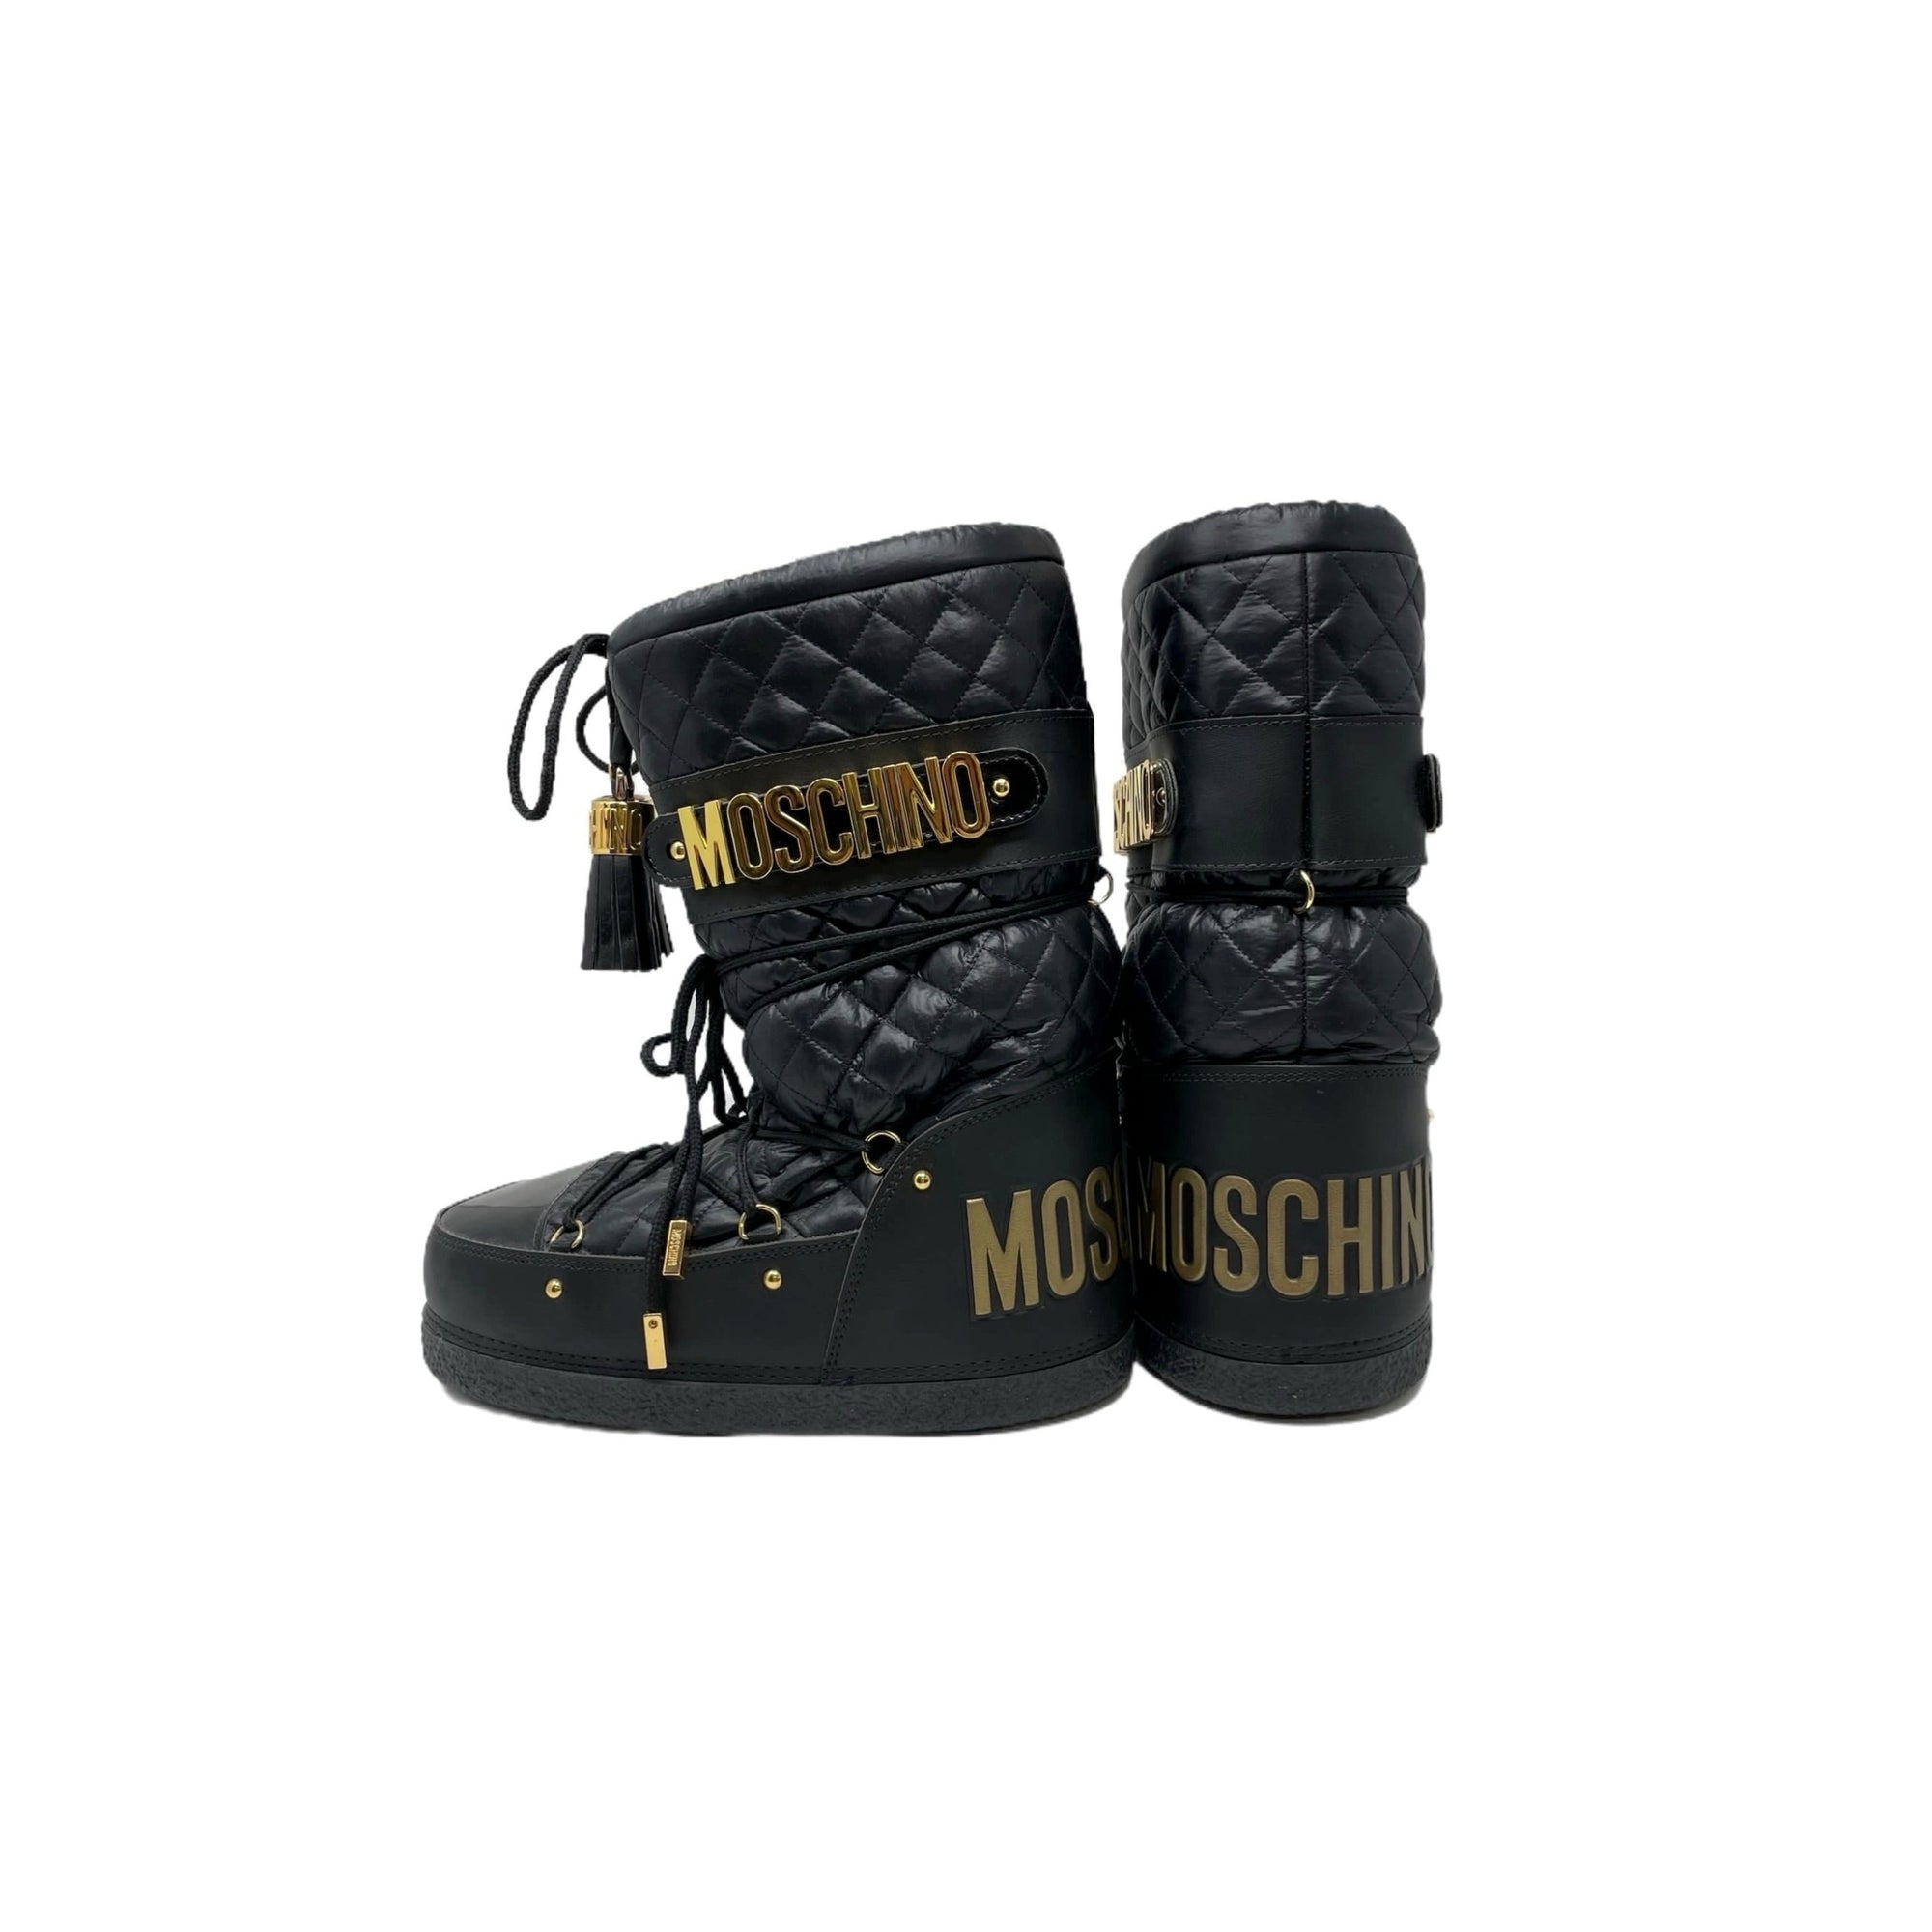 Moschino Black Chain Logo Boots - Shoes